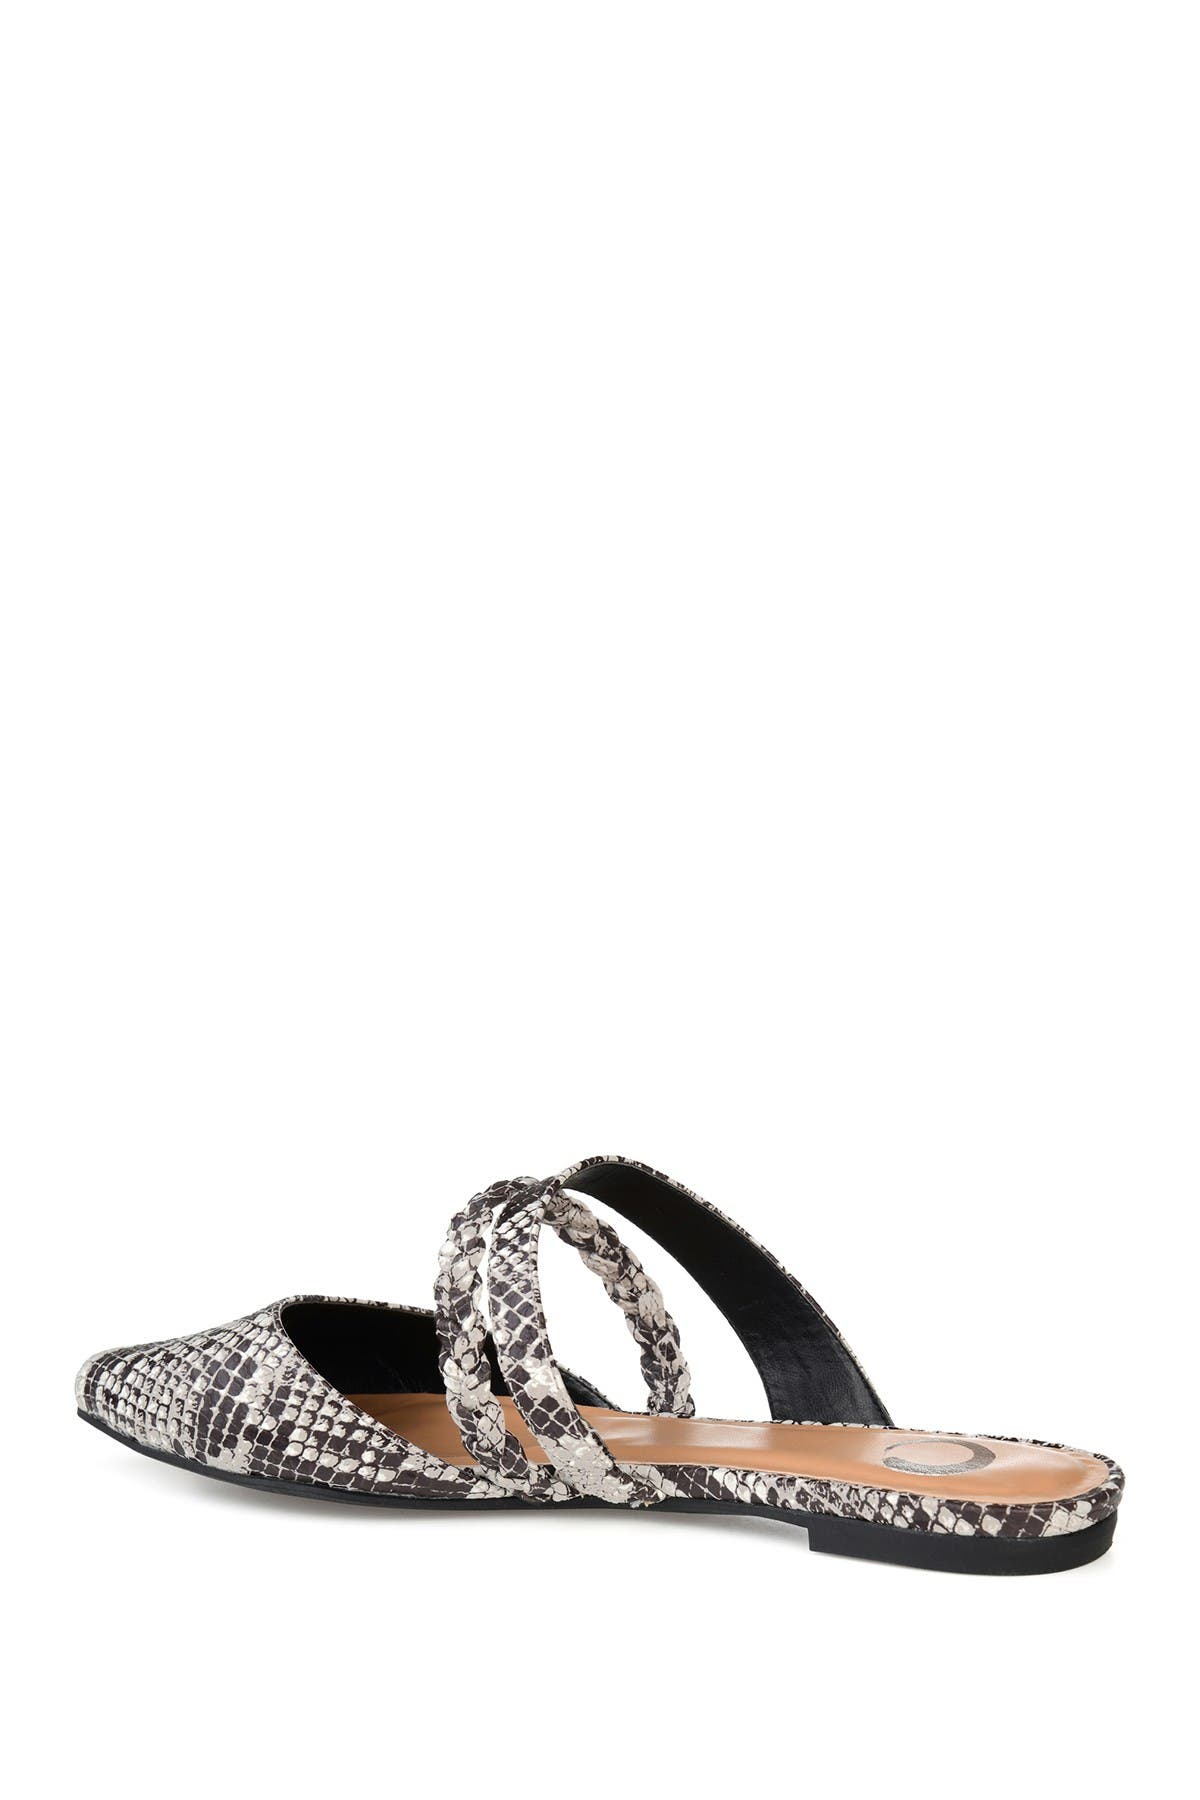 Journee Collection Olivea Braided Strap Mule In Open Miscellaneous1